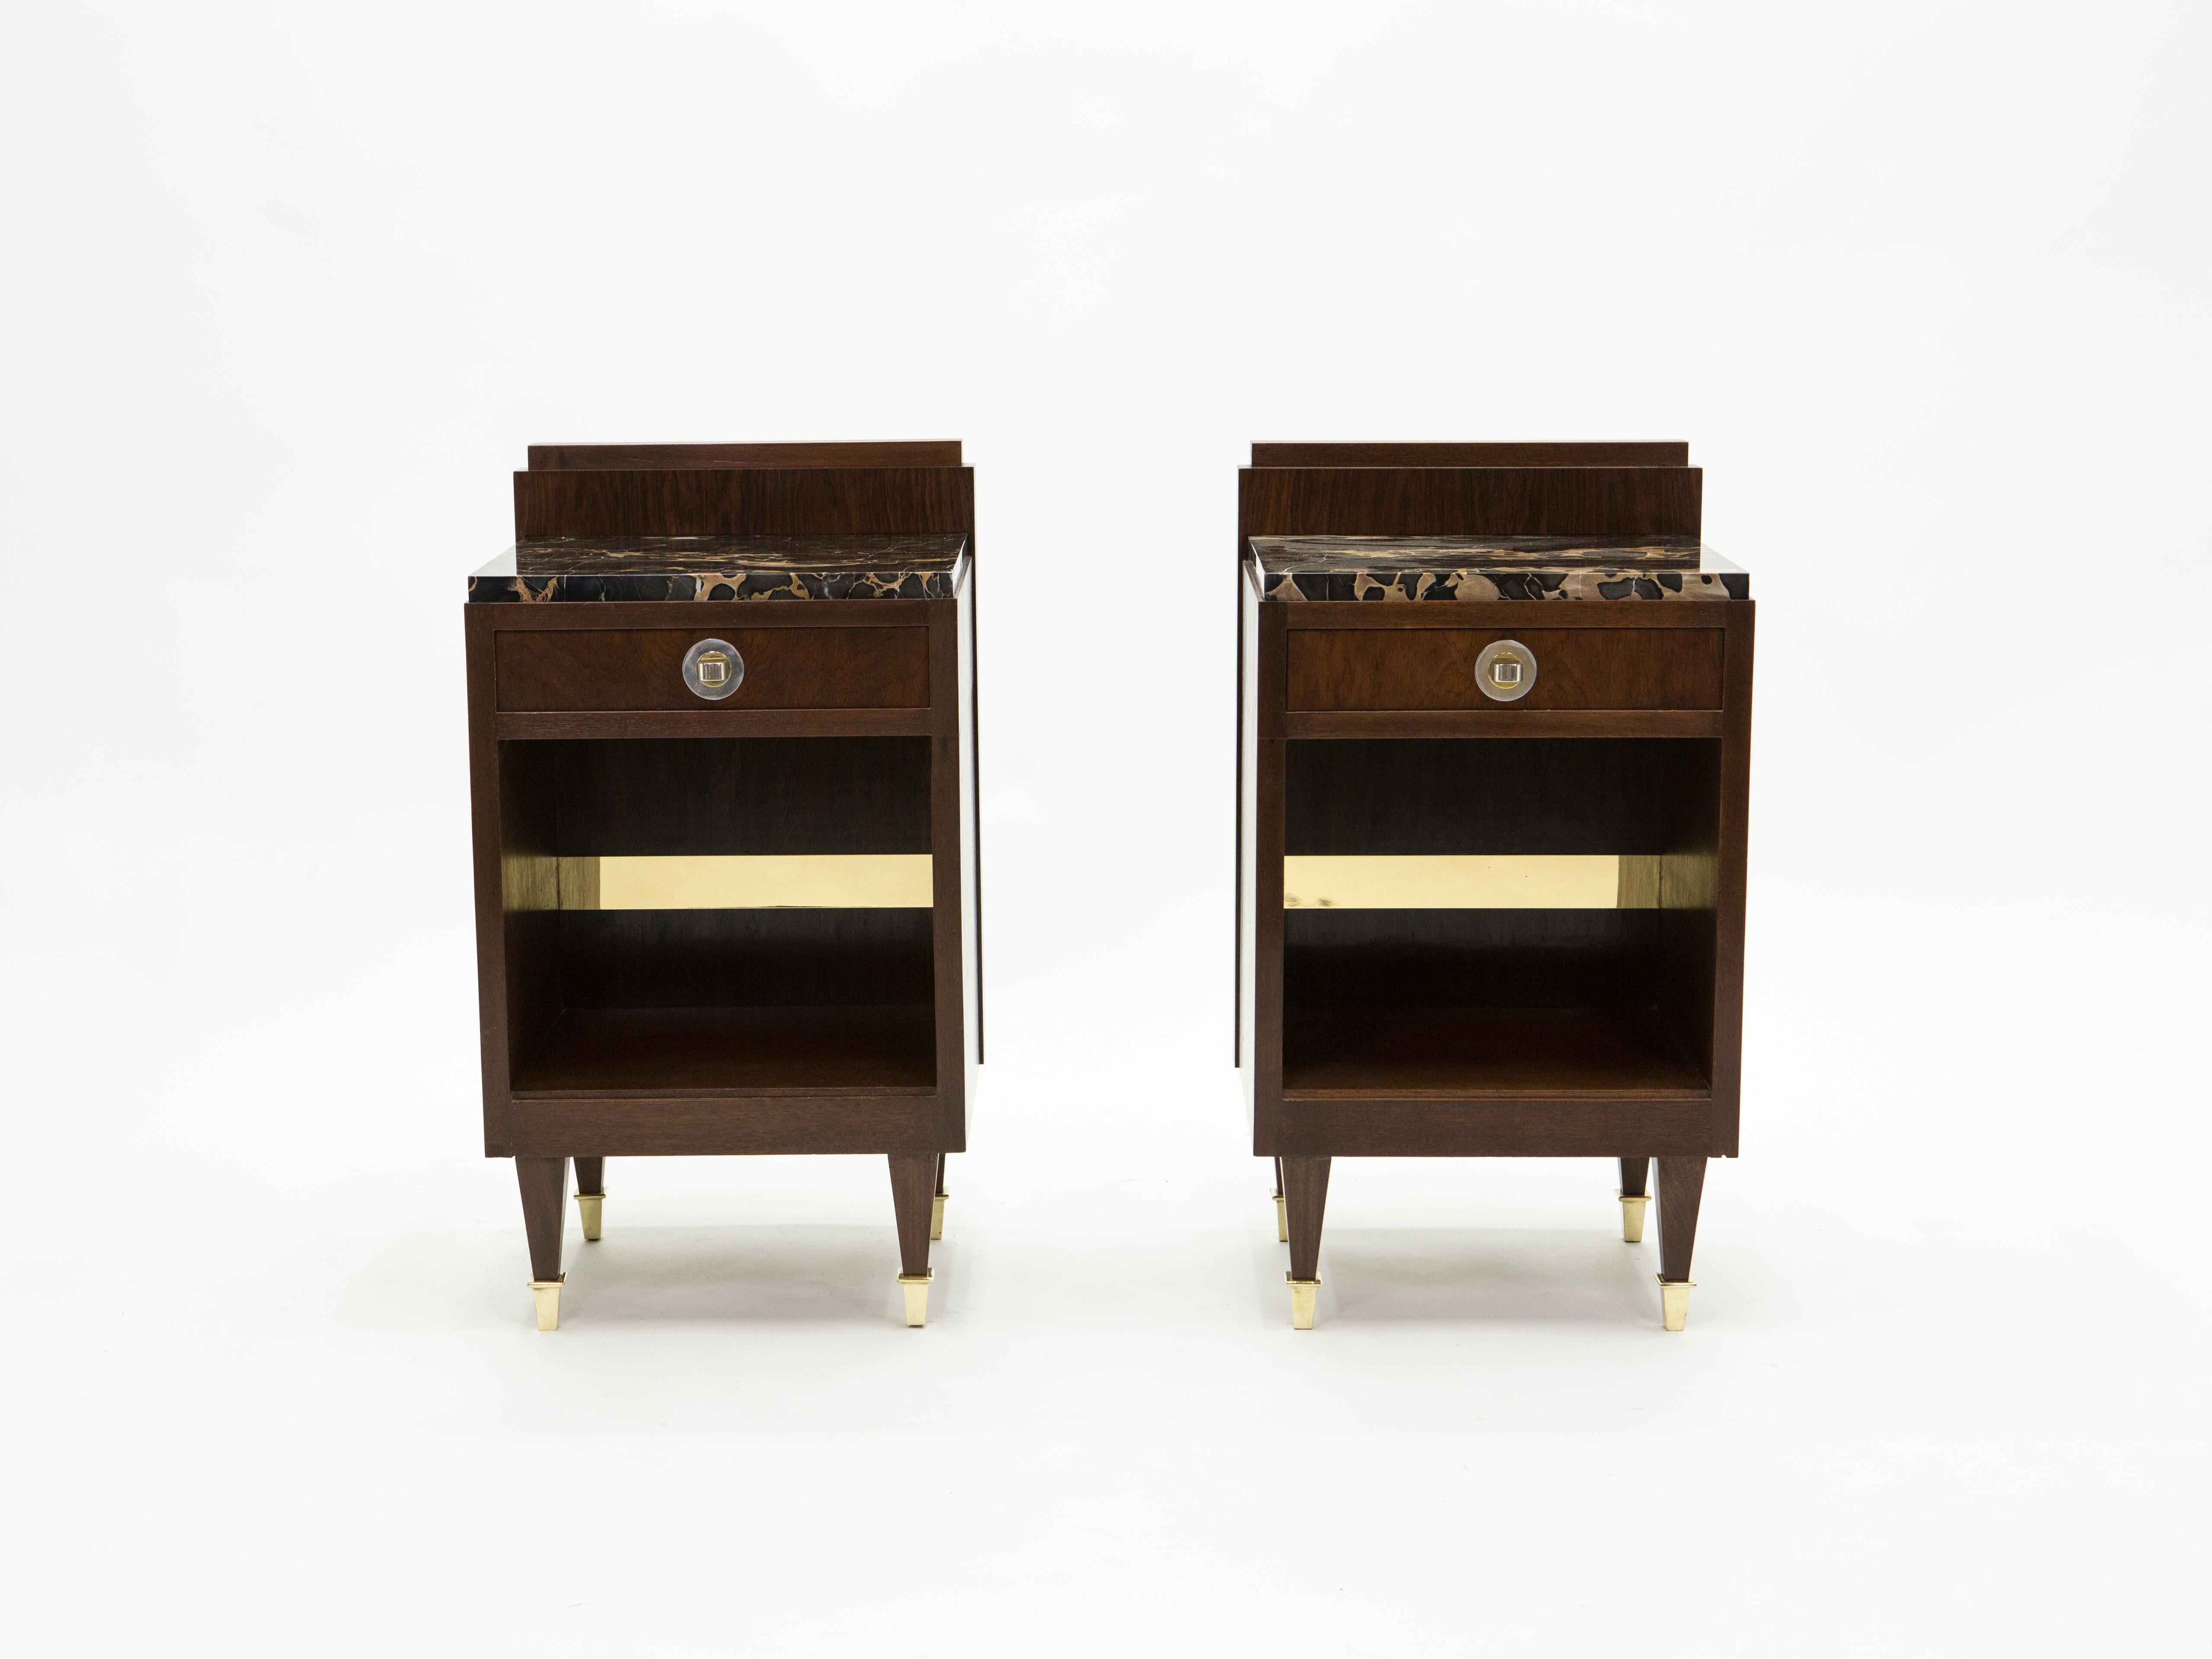 This French Art deco pair of nightstands is crafted with a beautiful rosewood paired with Portoro marble tops. Pure French art deco creation, featuring one drawer and a niche with brass details, these beautiful pieces would make great staging pieces